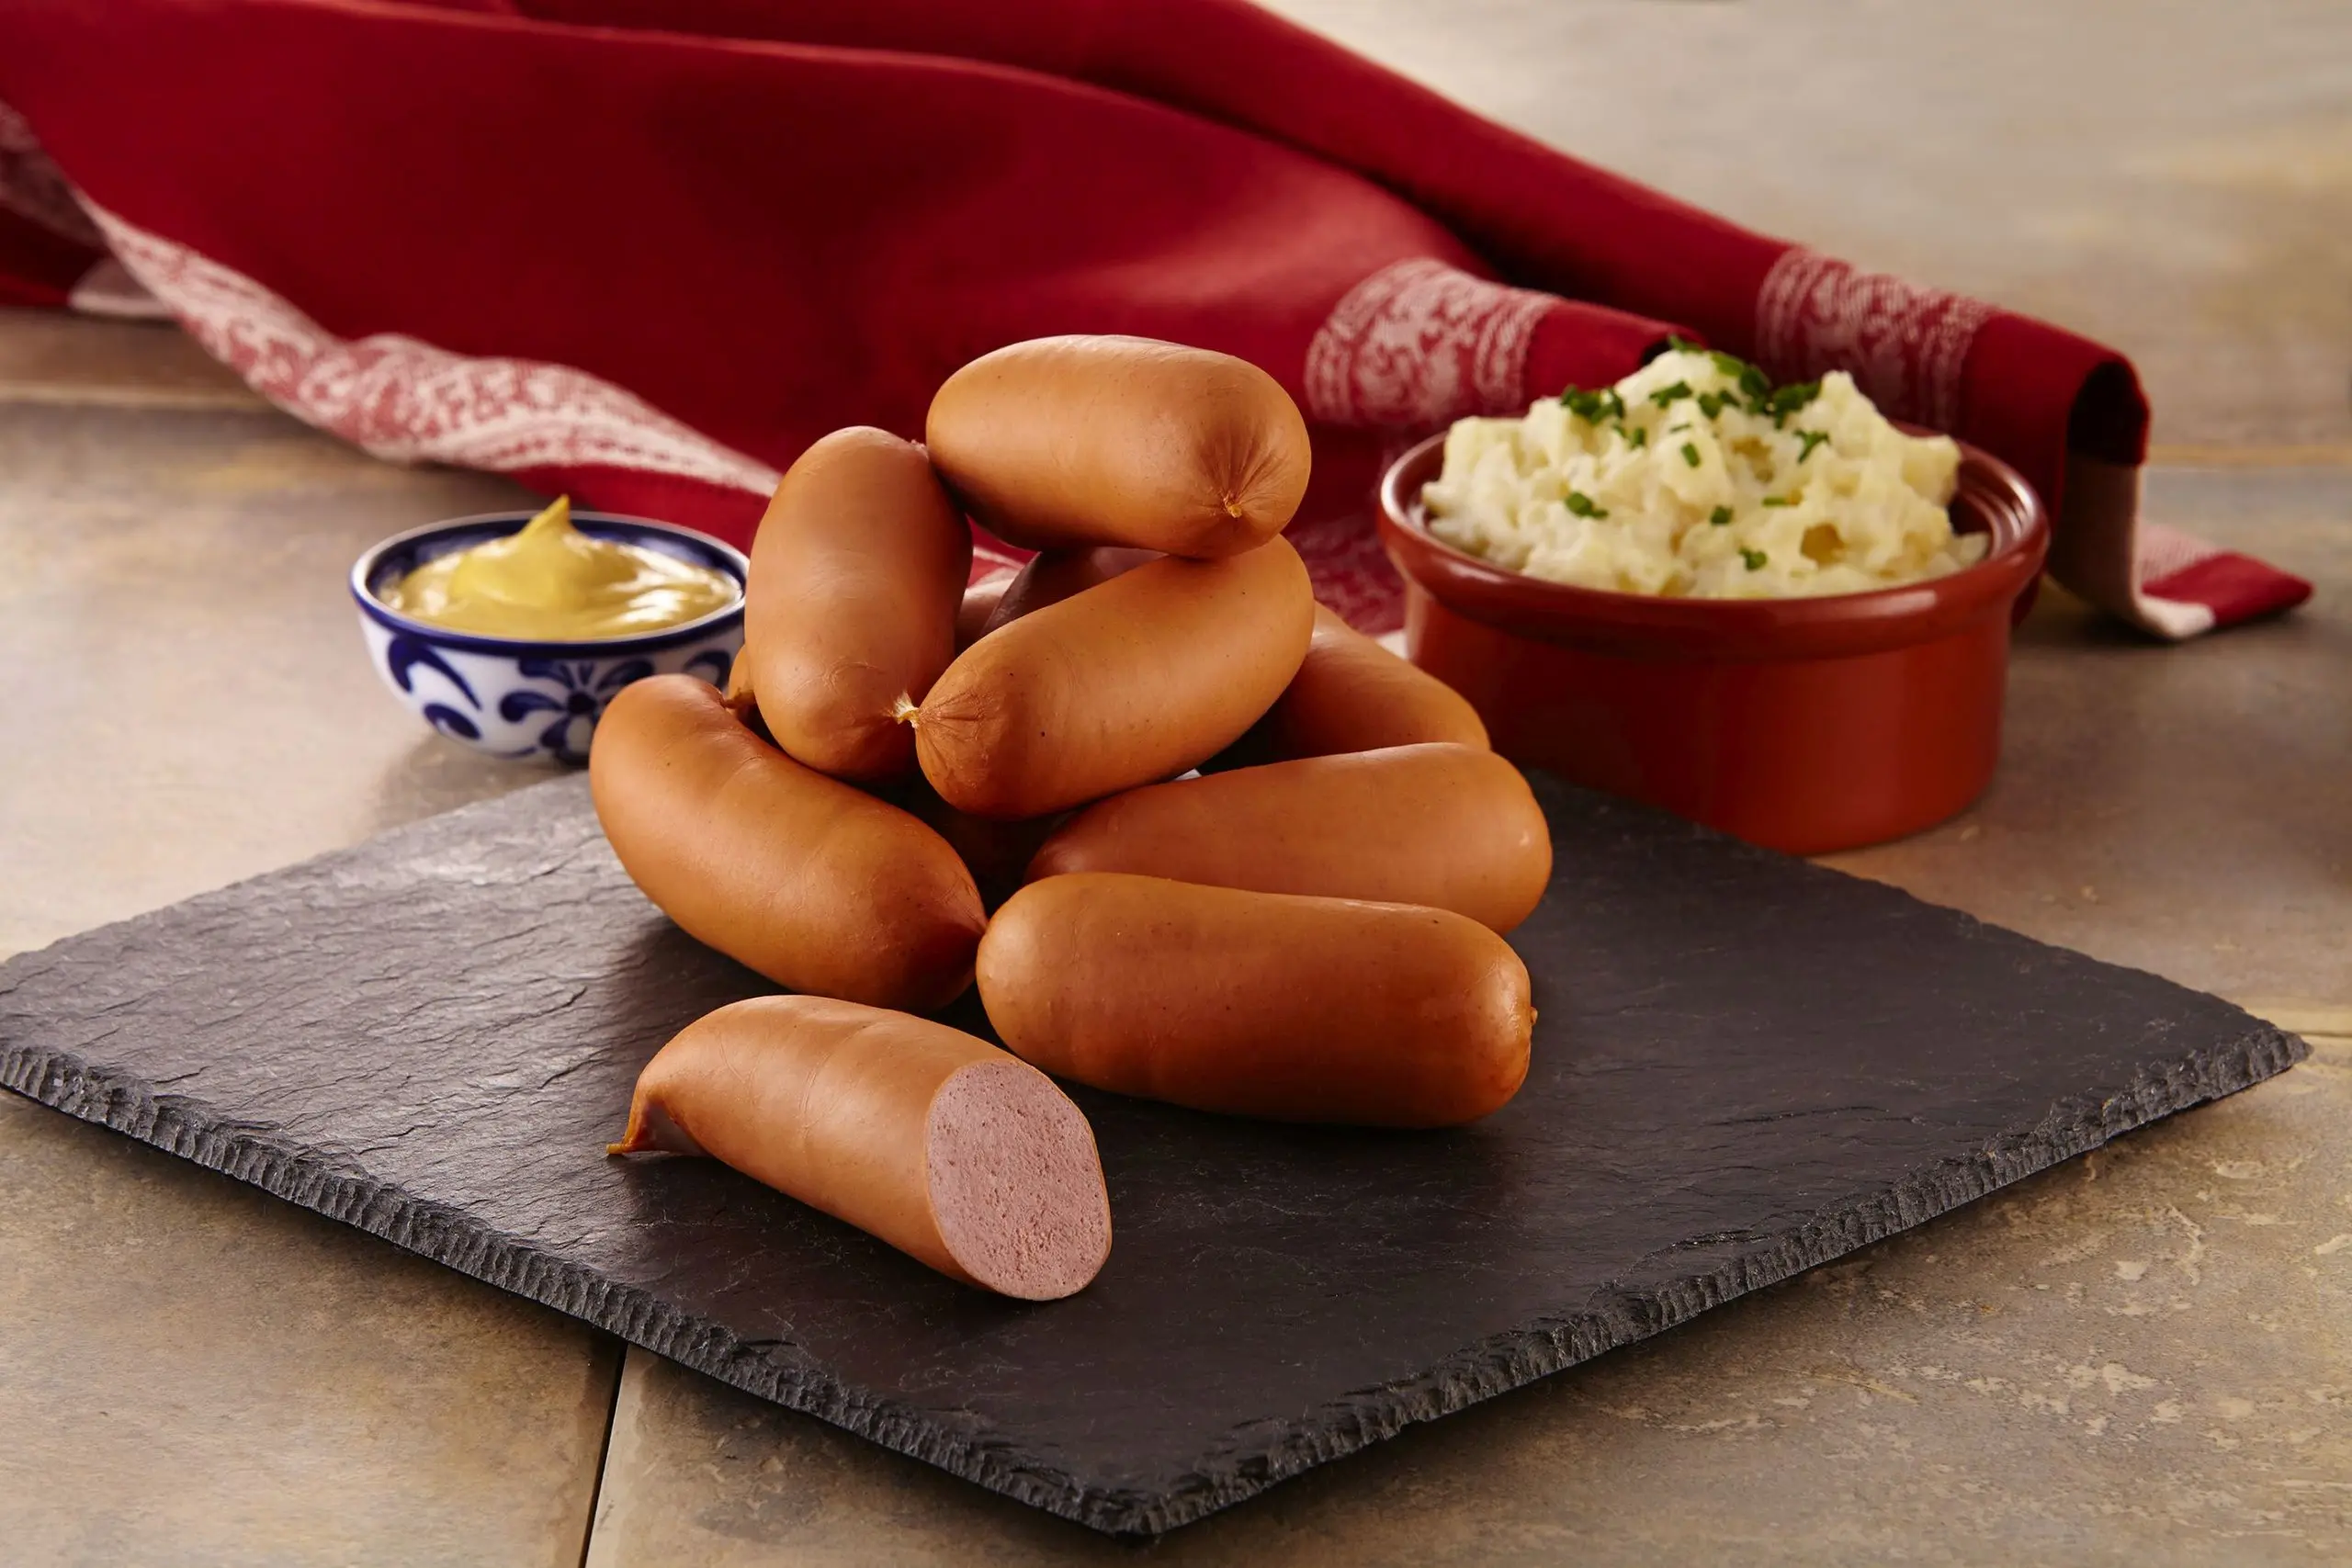 bavarian smoked sausage with garlic flavor - What is another name for garlic sausage